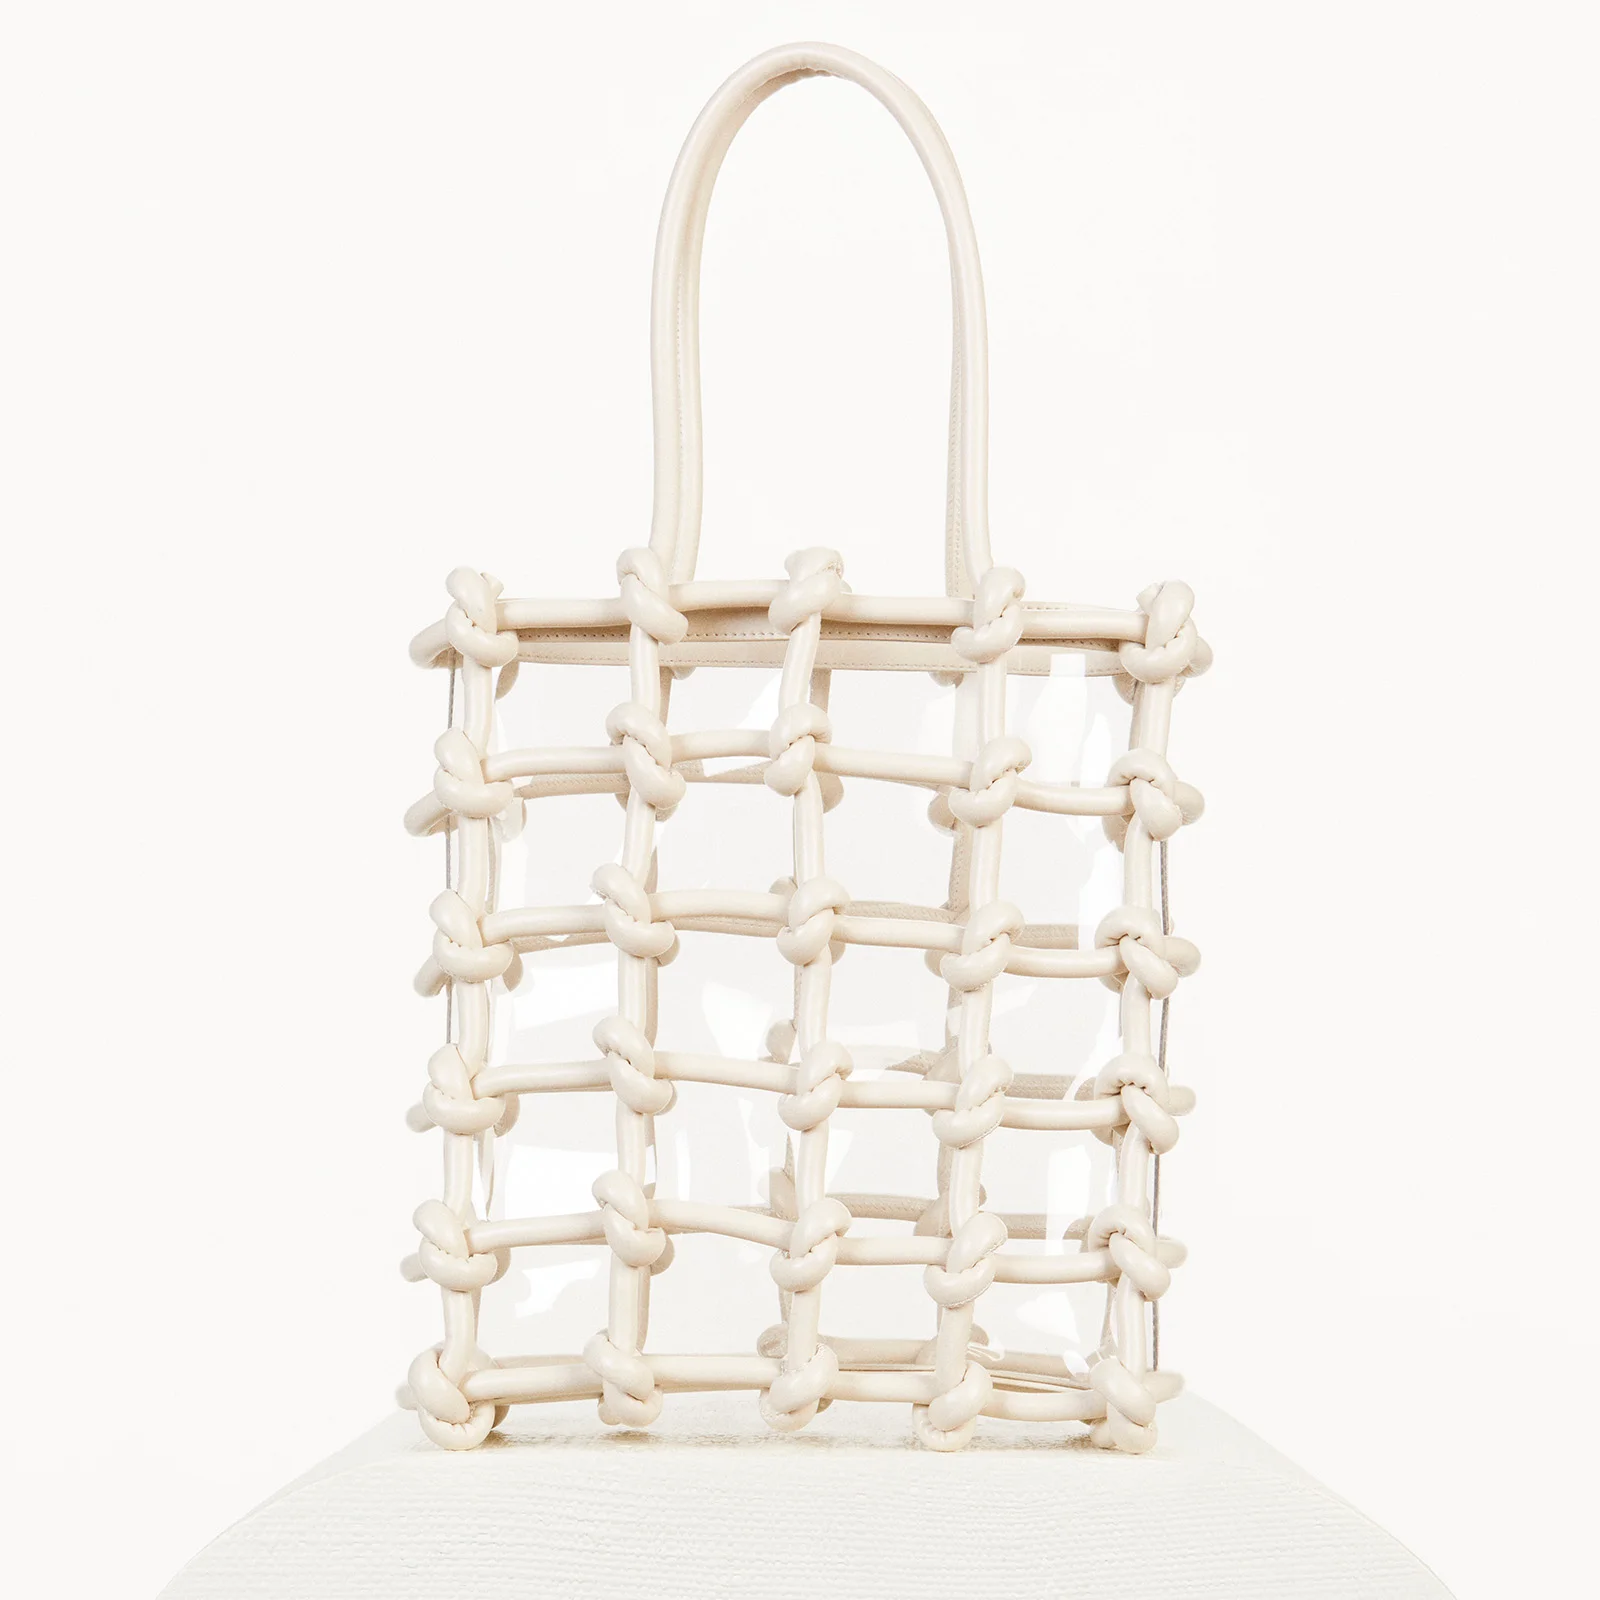 Cult Gaia Women's Enzo North-South Tote - Off White Image 1